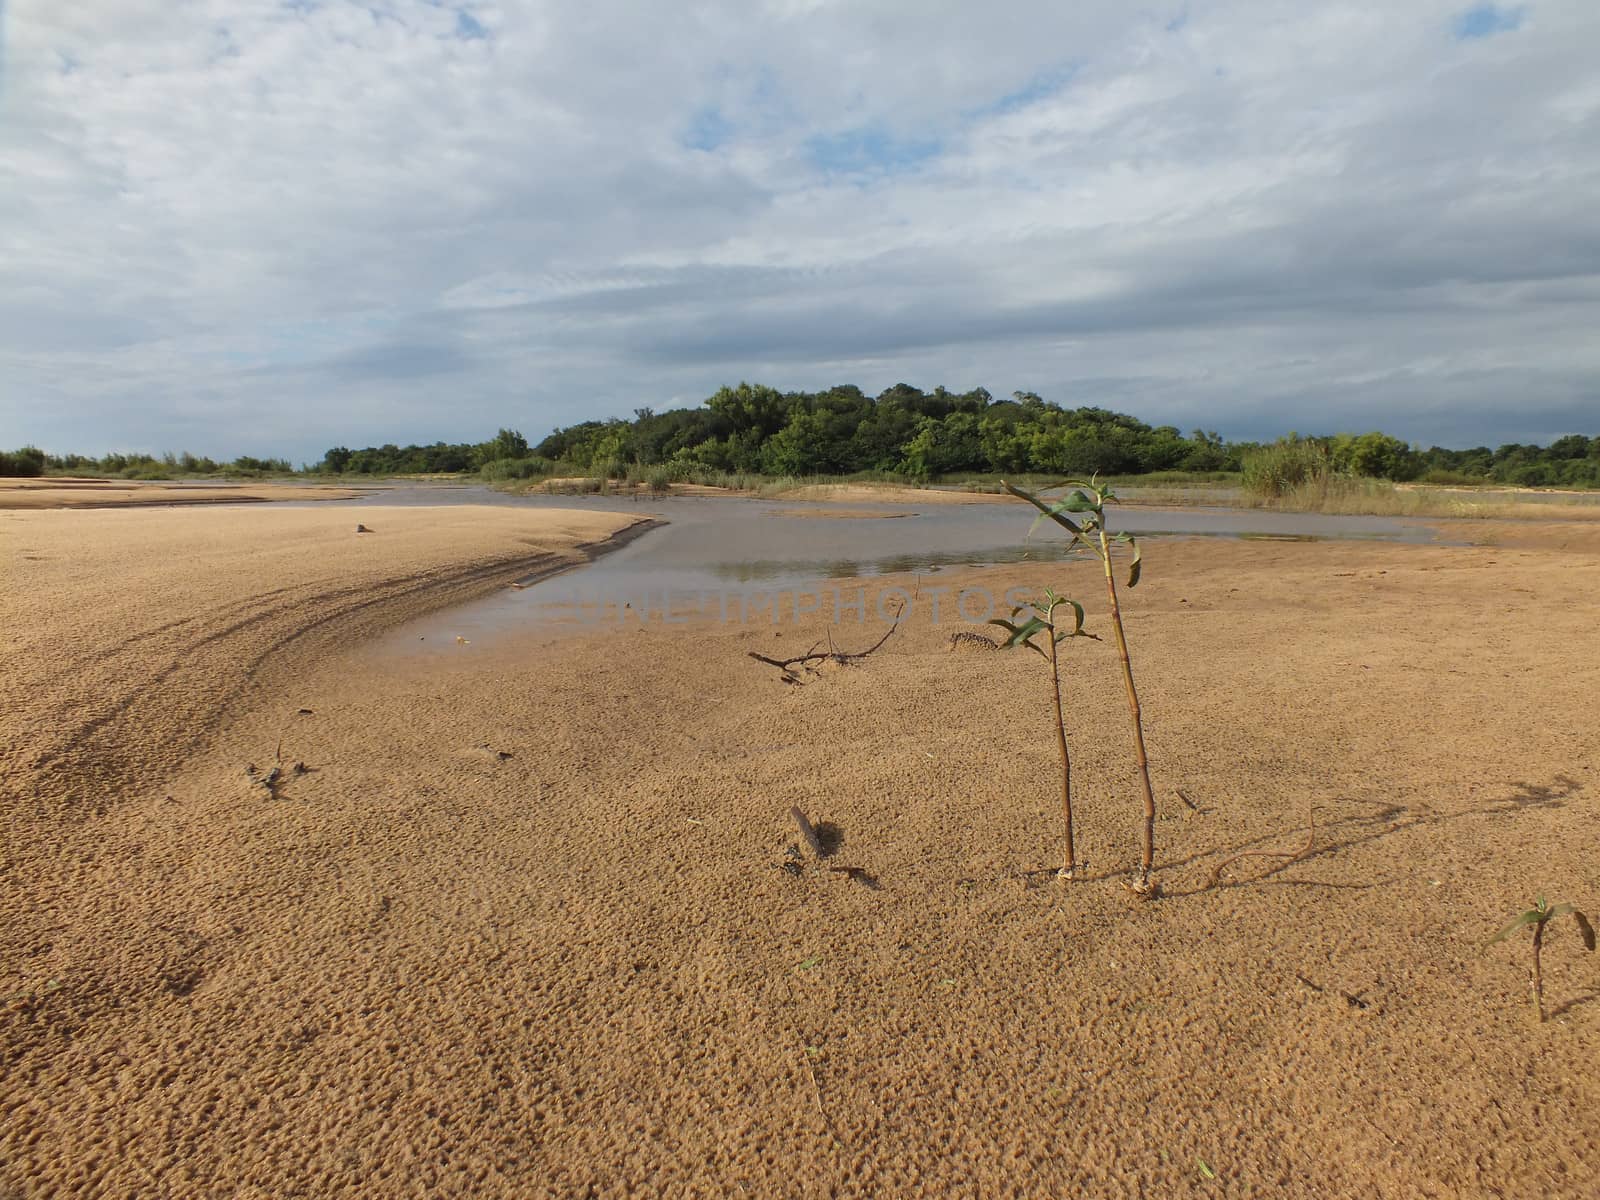 A pioneer species starts to colonise the Isla Queguay Chica sandbank. Eventually the sandbank will become stabalised and covered with vegetation like the rest of the island.